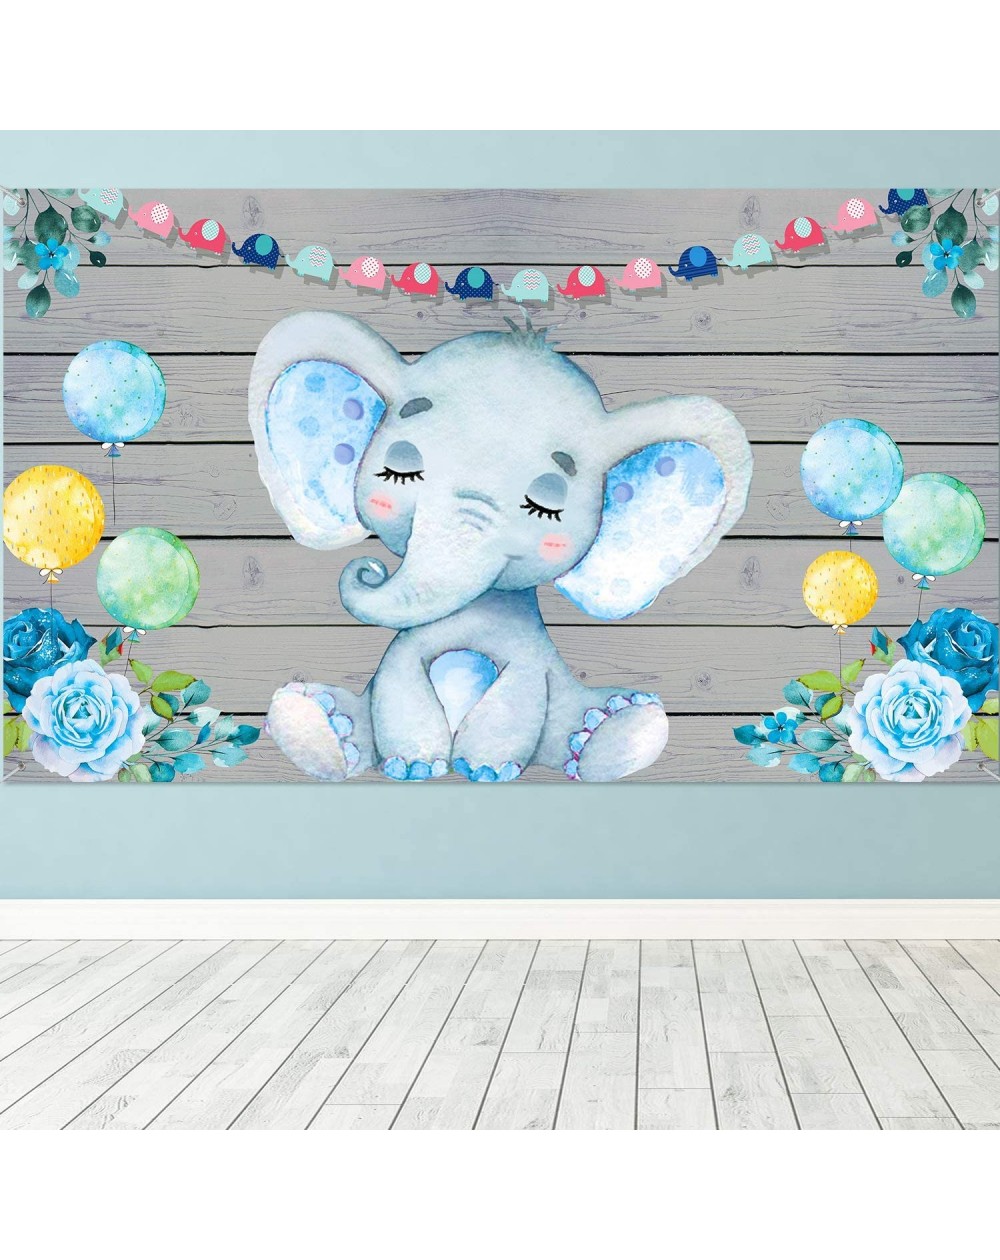 Banners Blue Elephant Boy Baby Shower Decorations Supplies- Large Fabric Cute Baby Elephant Backdrop for Baby Shower Party El...